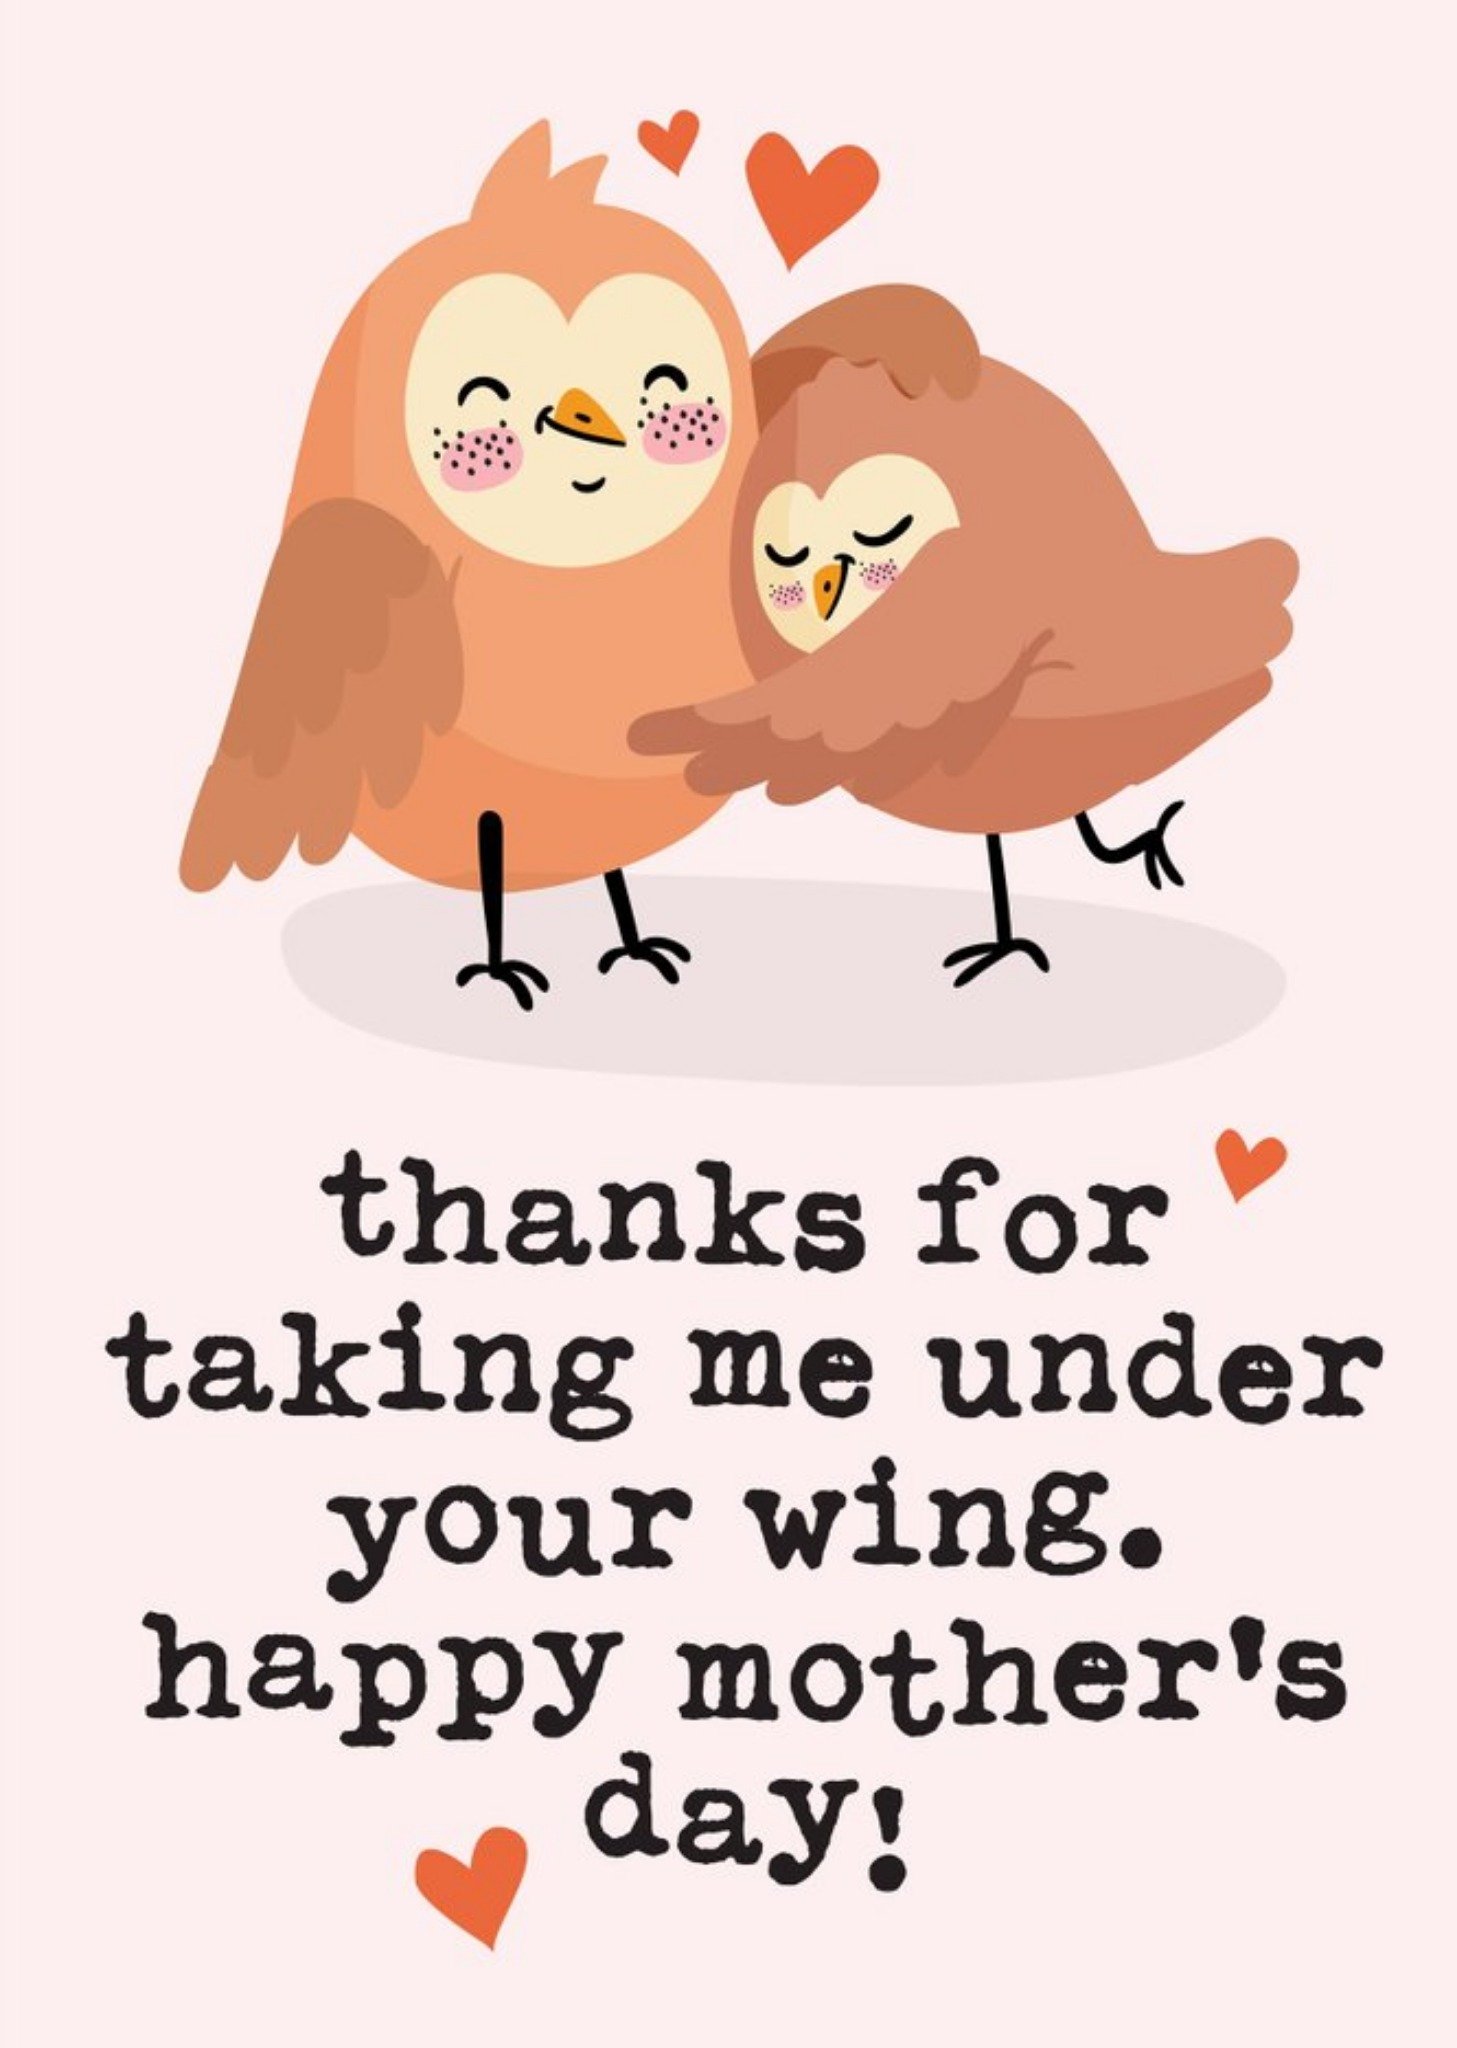 Moonpig Illustration Of Two Owls Hugging Surrounded By Love Hearts Mother's Day Card Ecard